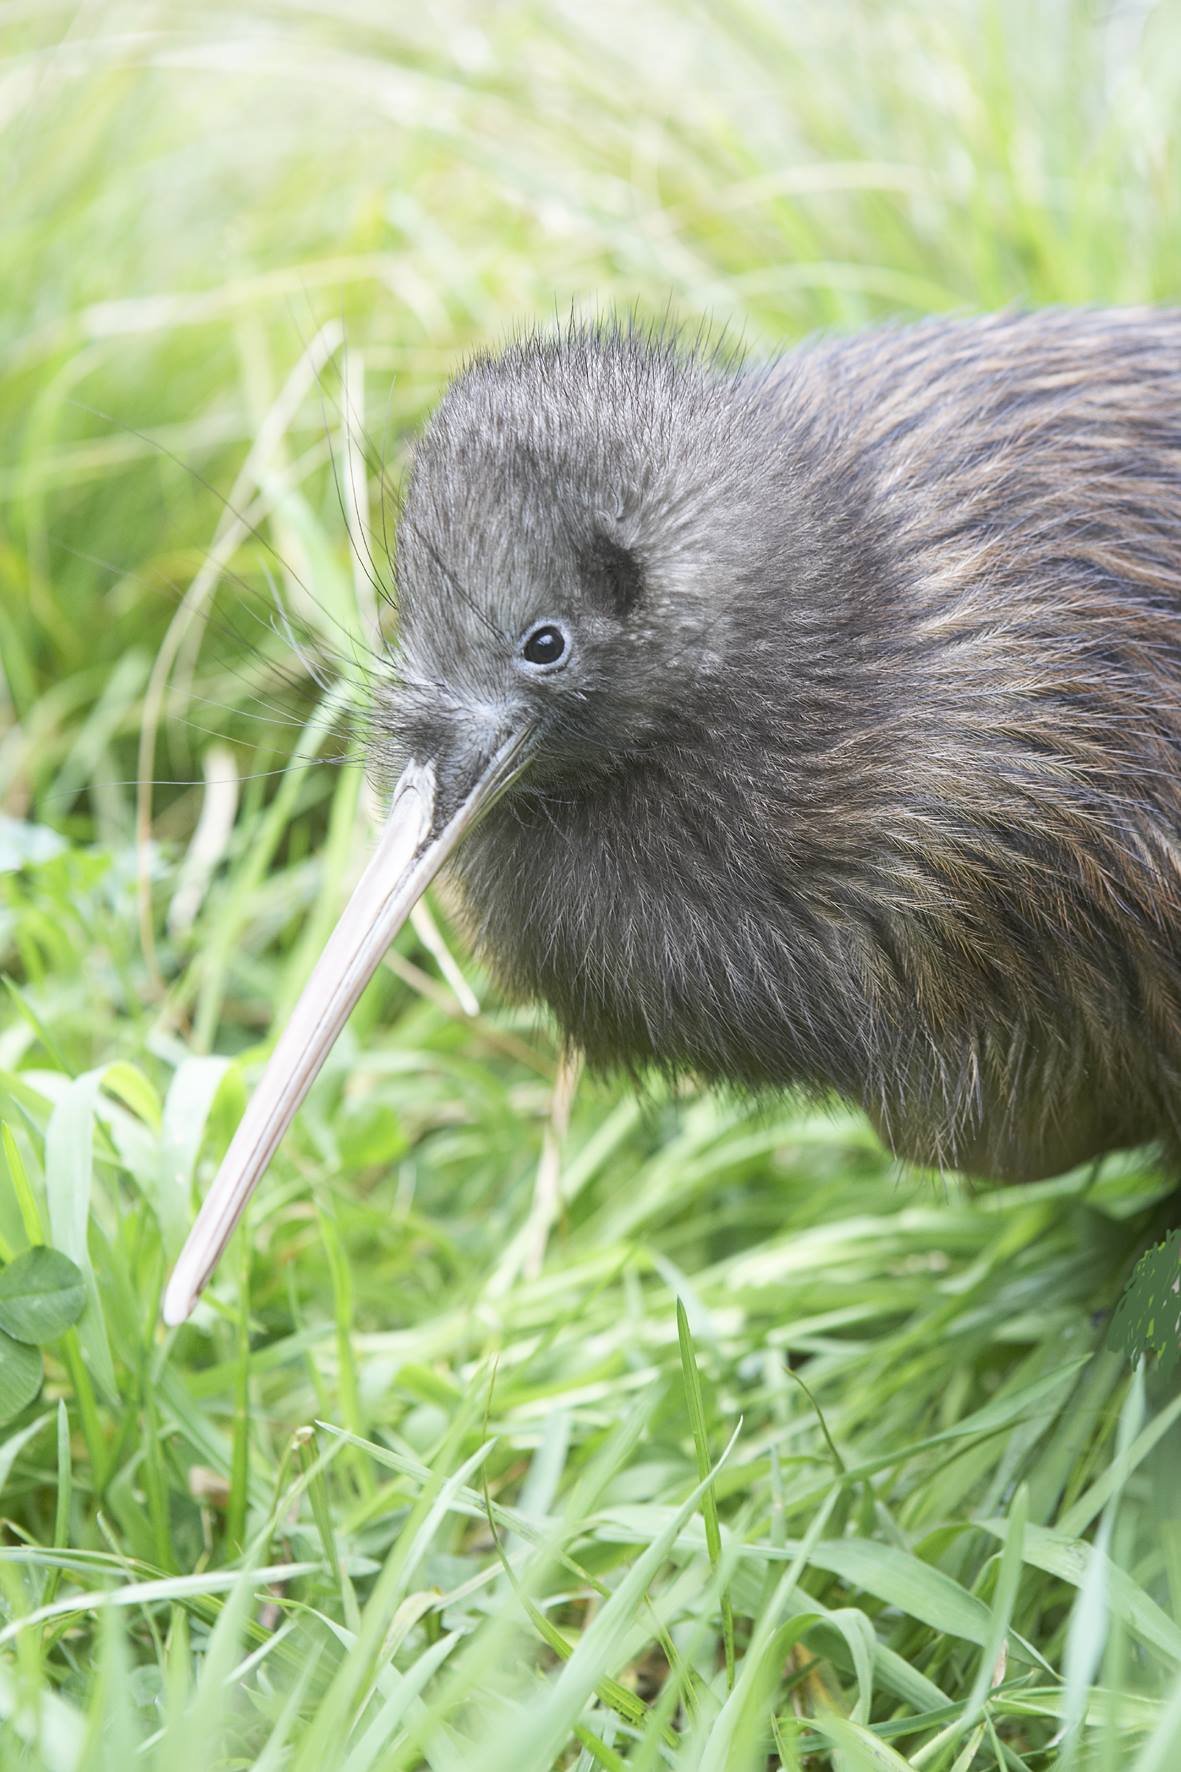 A kiwi at Willowbank Wildlife Reserve in Christchurch